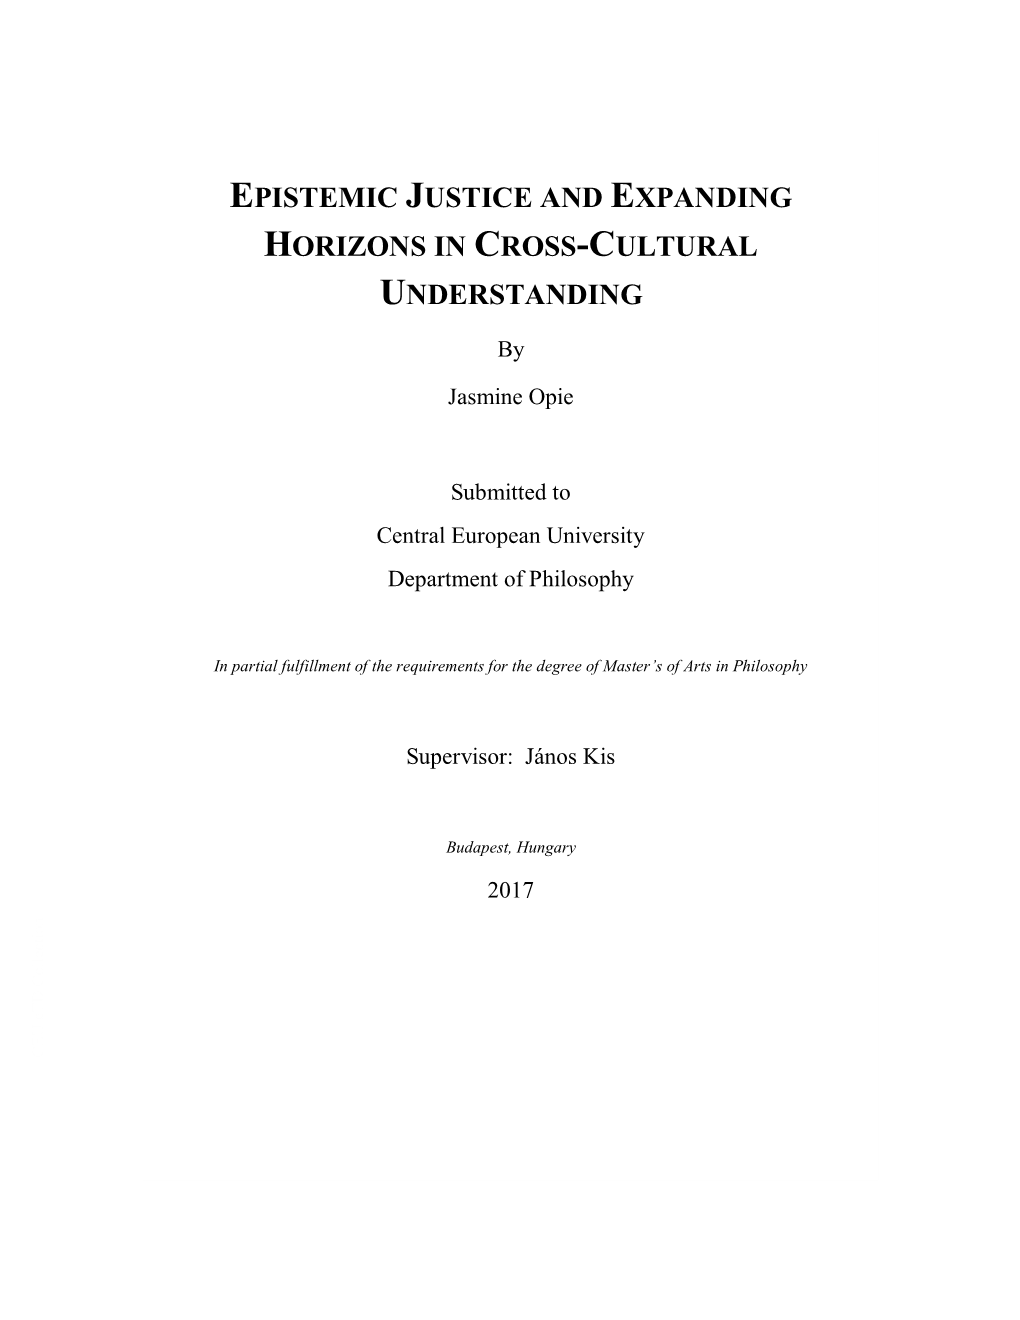 Epistemic Justice and Expanding Horizons in Cross-Cultural Understanding